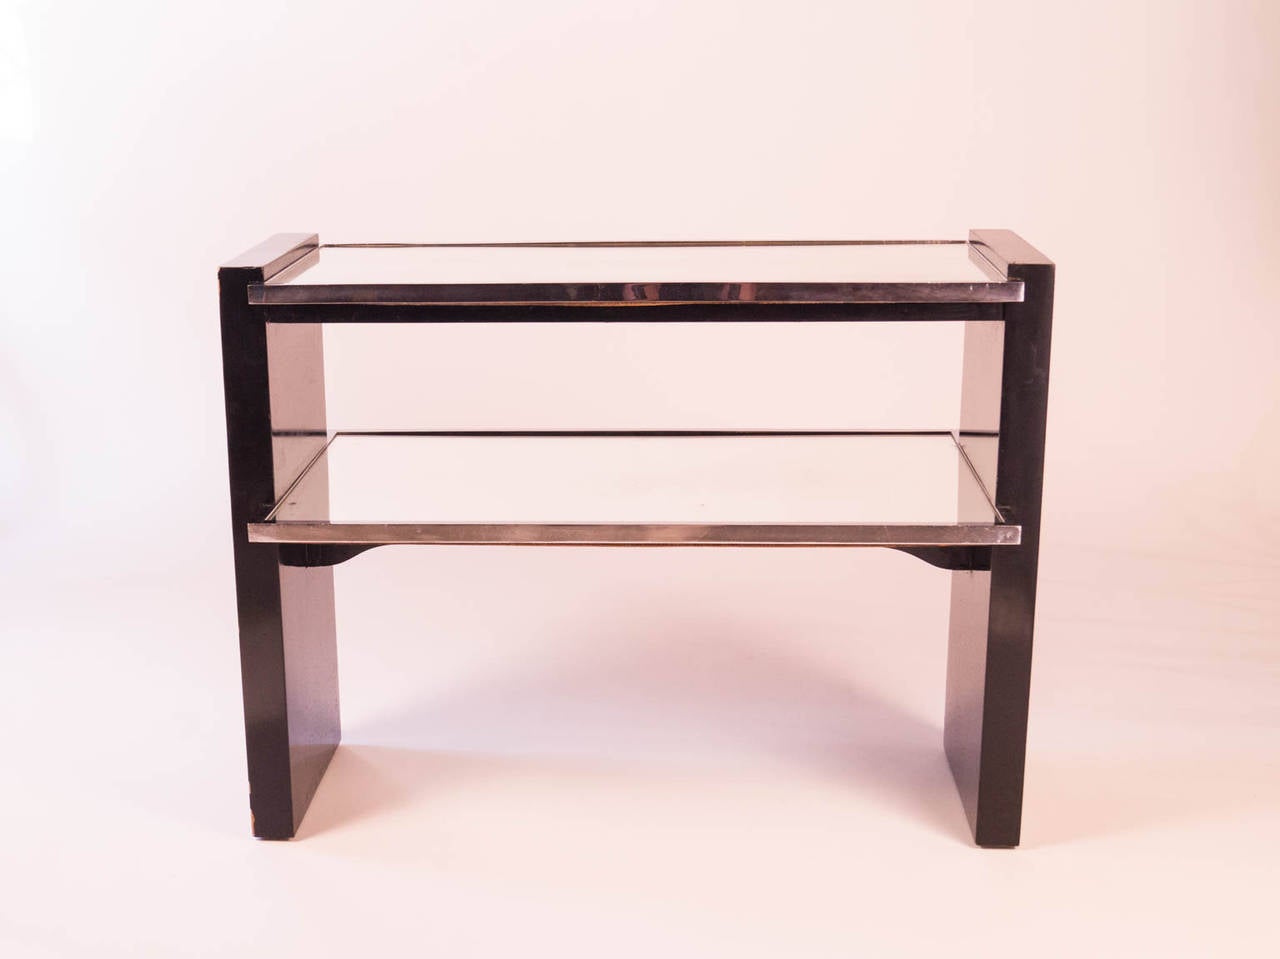 Modern Black Lacquer, Steel and Mirrored Side Table by Jacques Adnet, France, 1950s For Sale